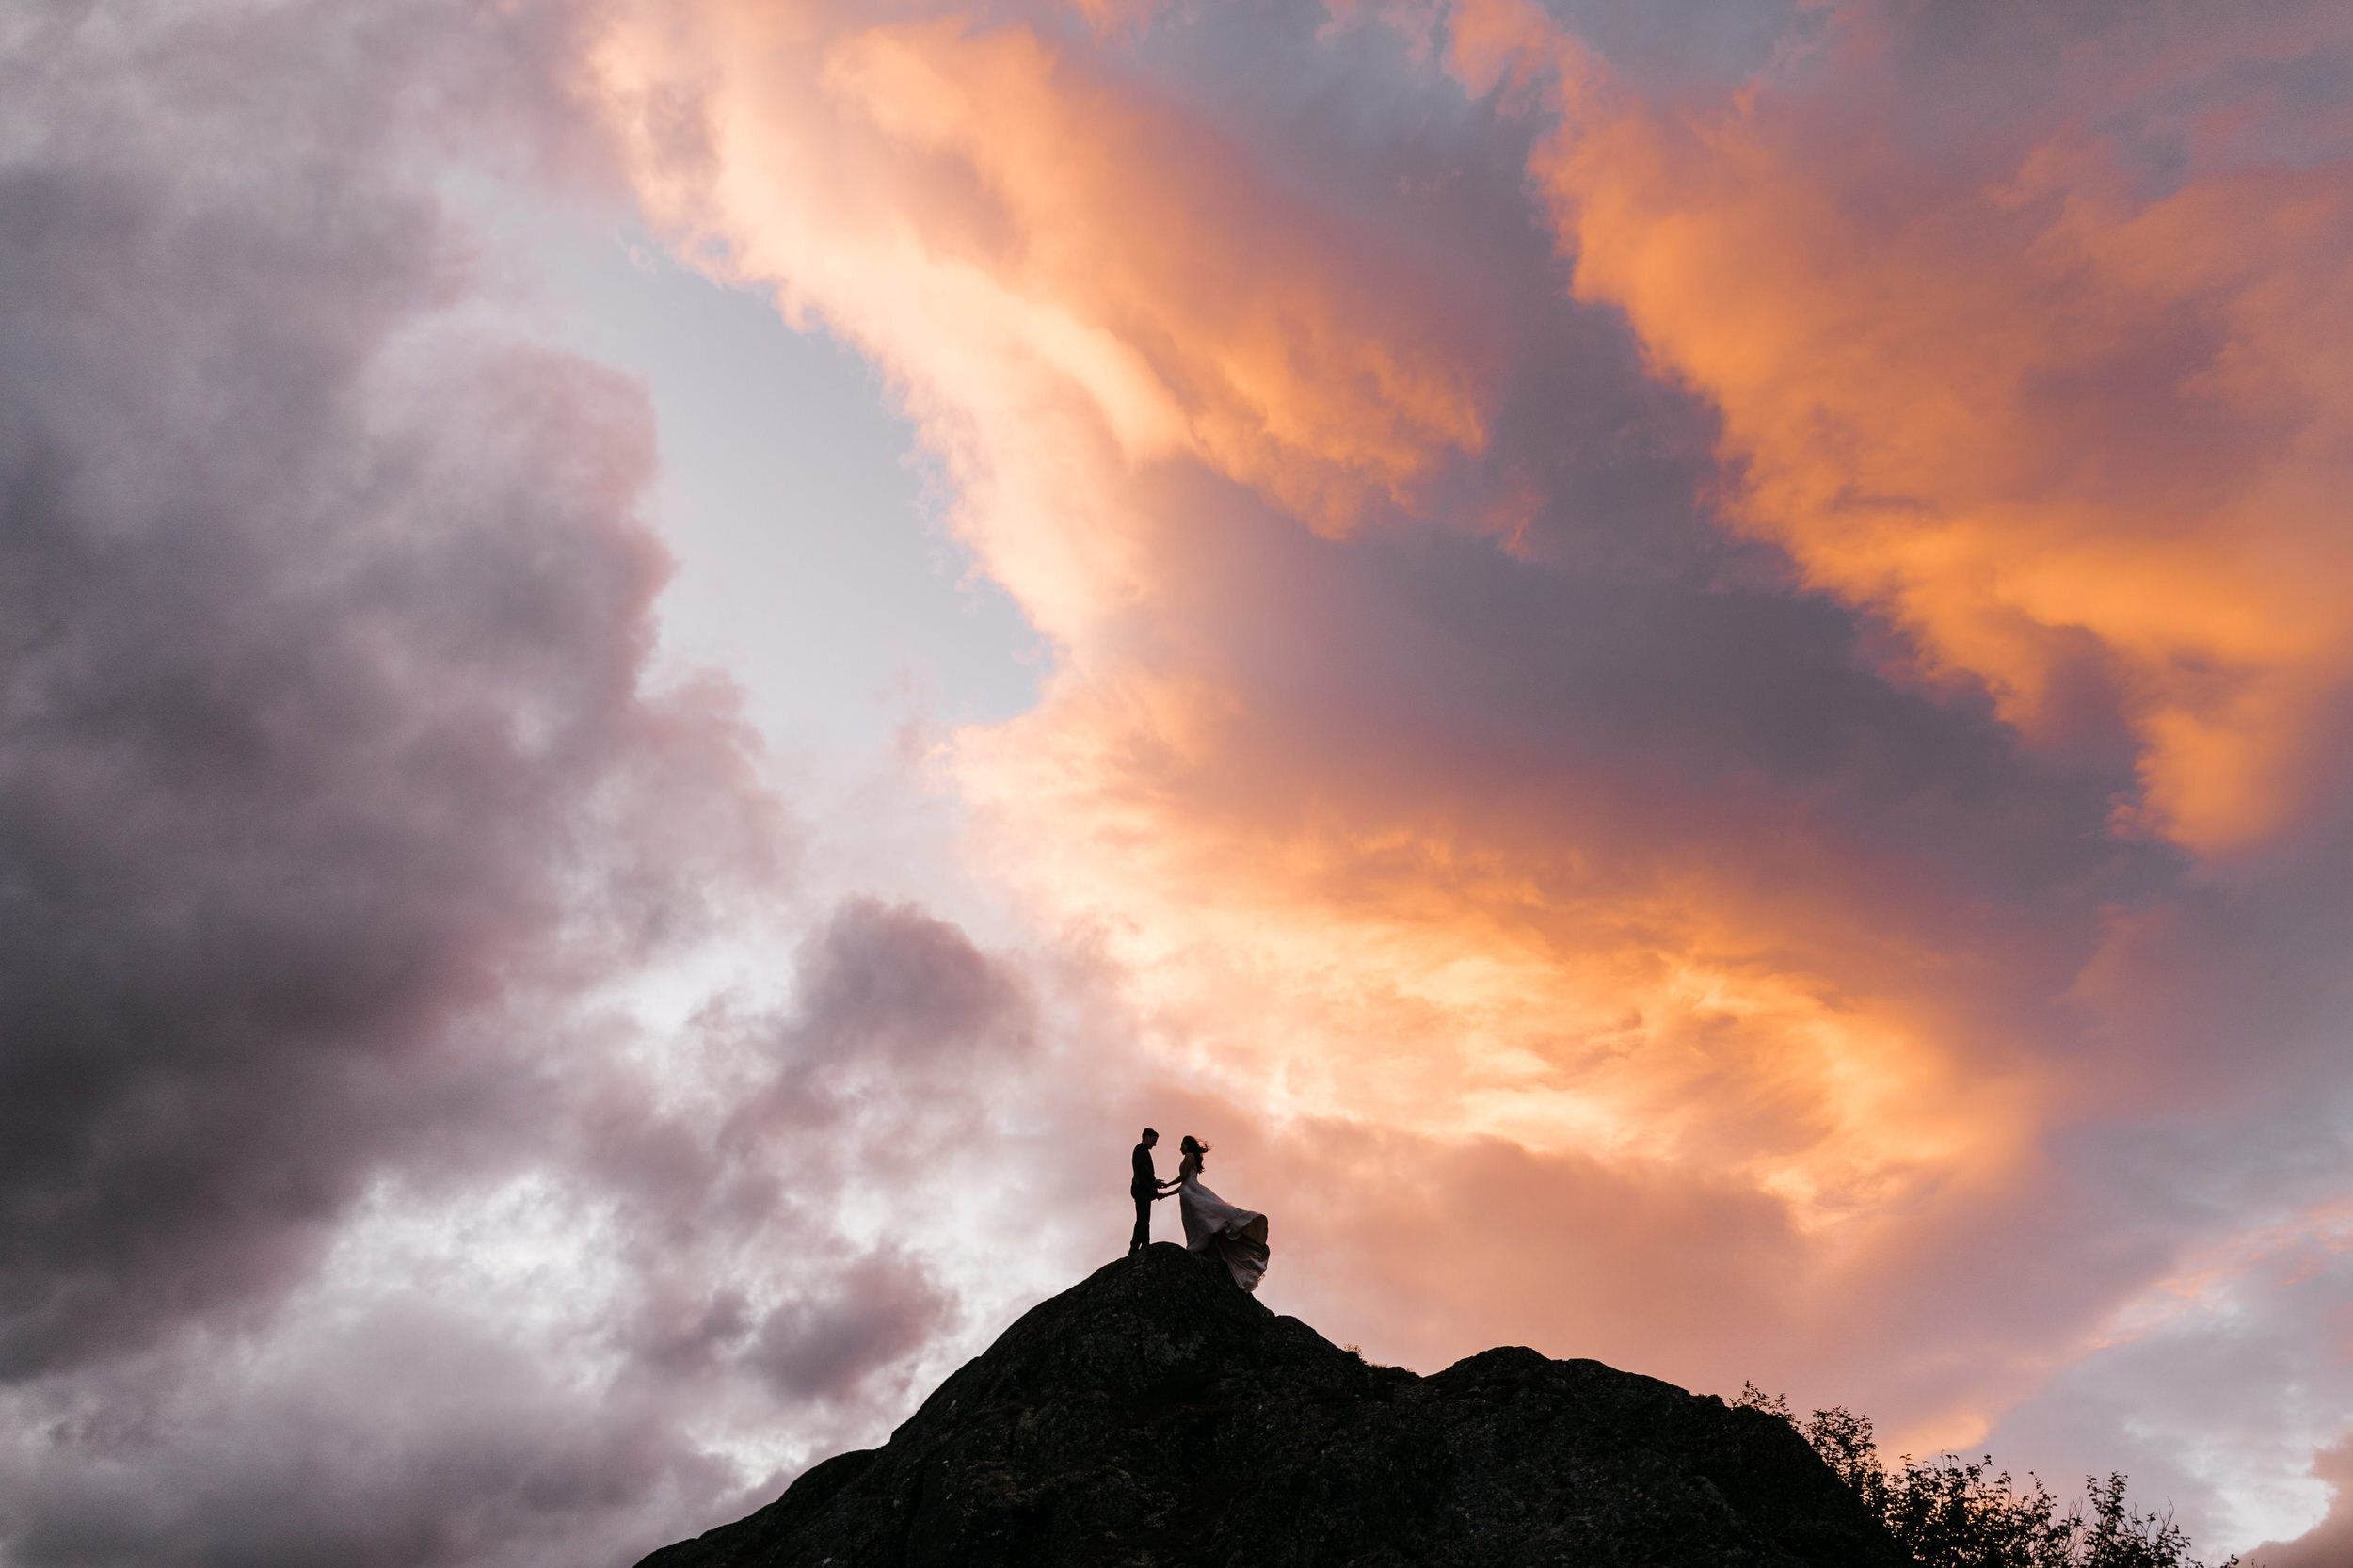 Sunrise Elopement on top of a Mountain in Alaska | Best of 2020, Our Favorite Wedding Photos of the Year | The Hearnes Adventure Wedding Photography